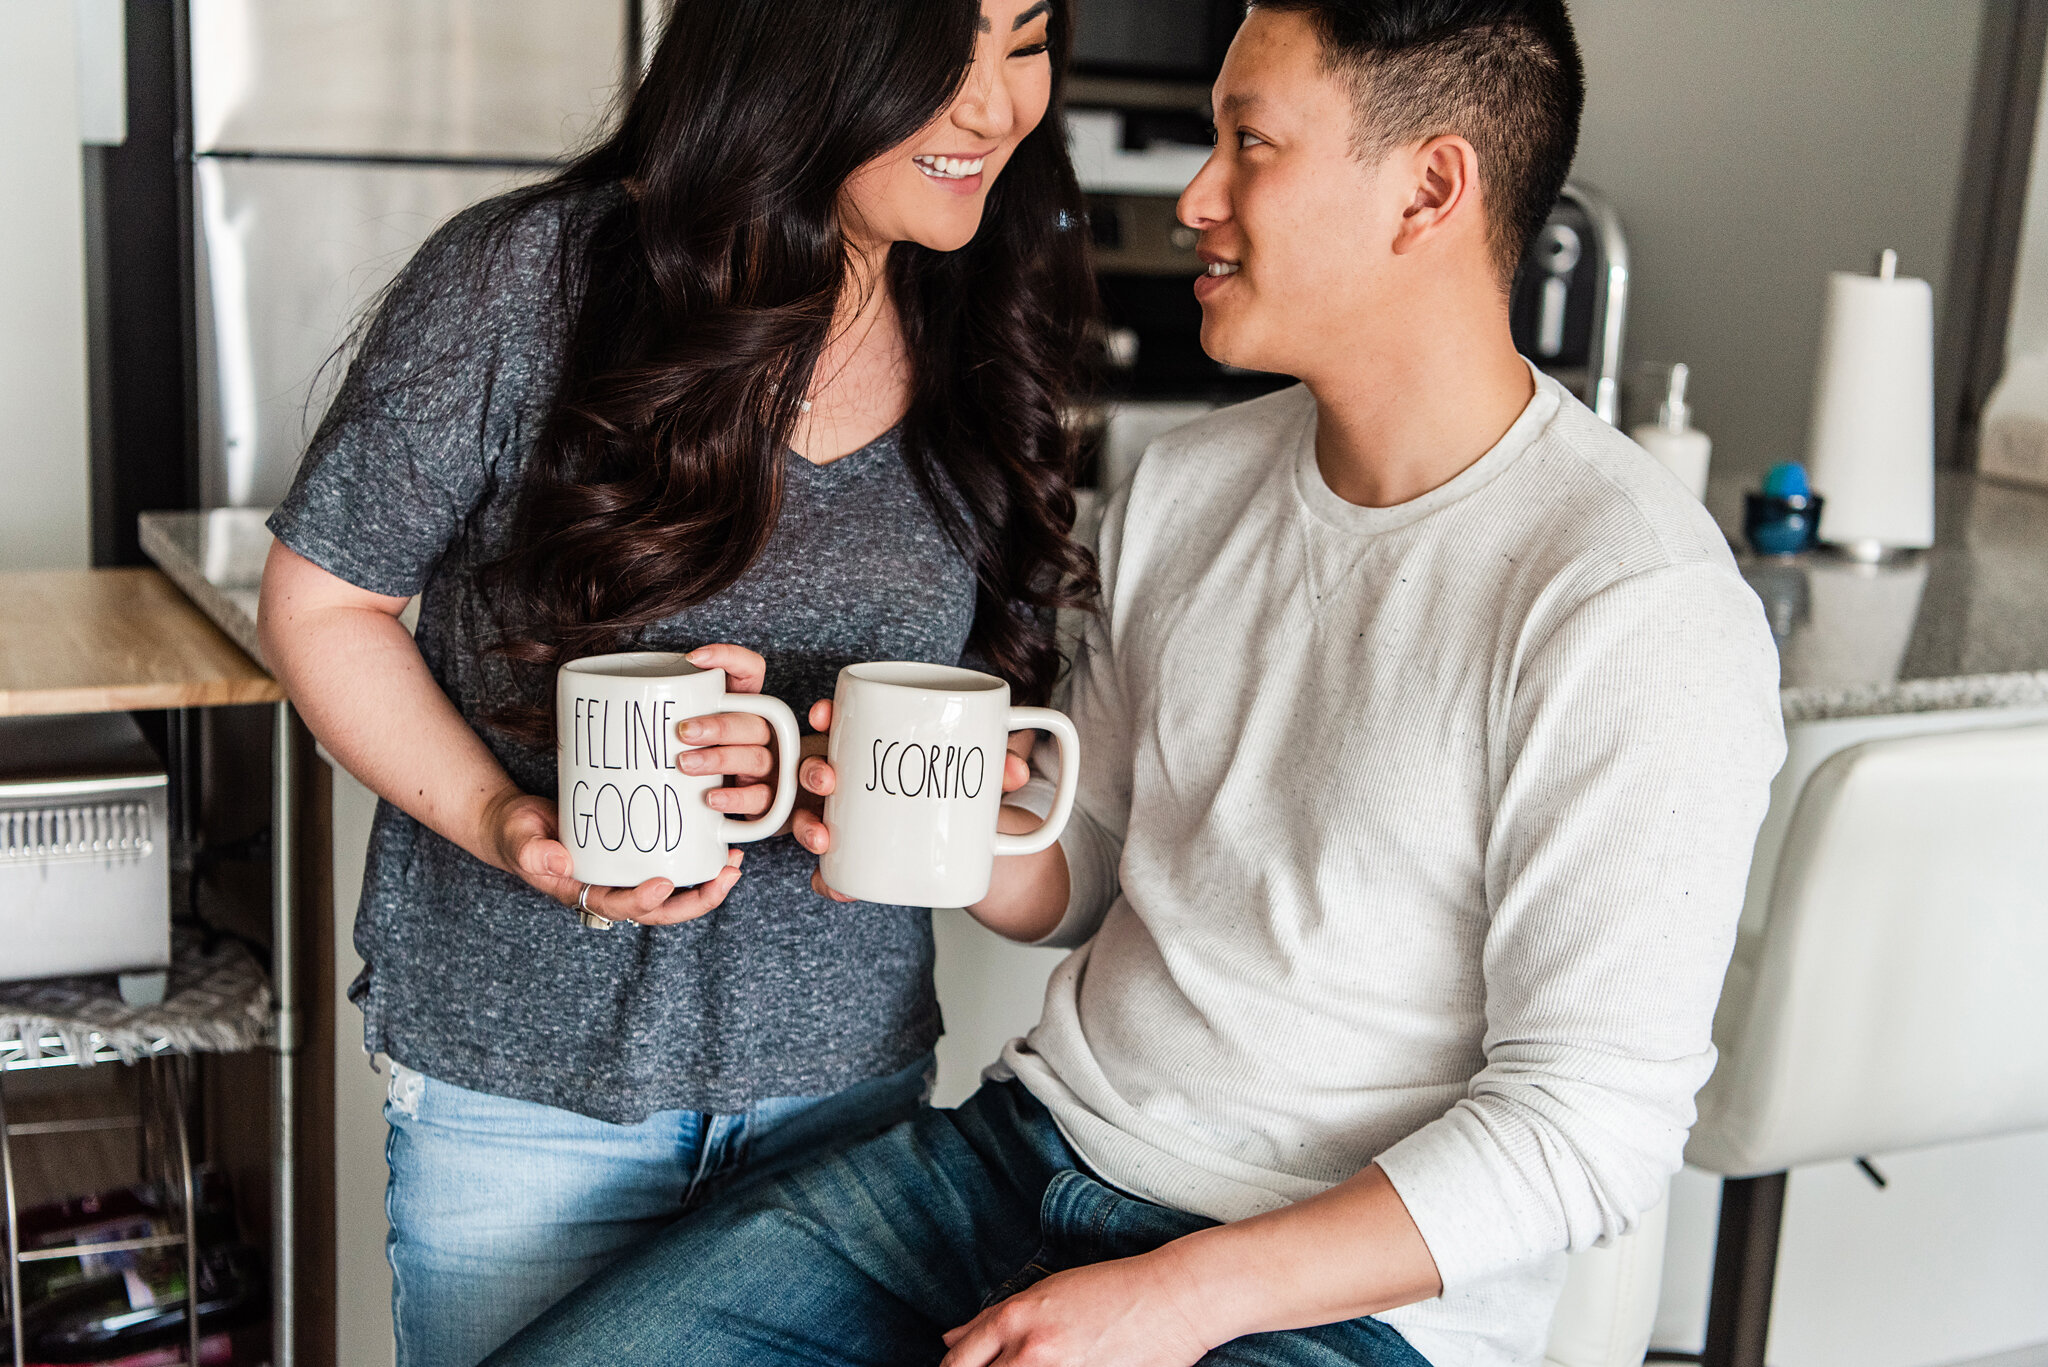 In_Home_Rochester_Couples_Session_JILL_STUDIO_Rochester_NY_Photographer_4235.jpg